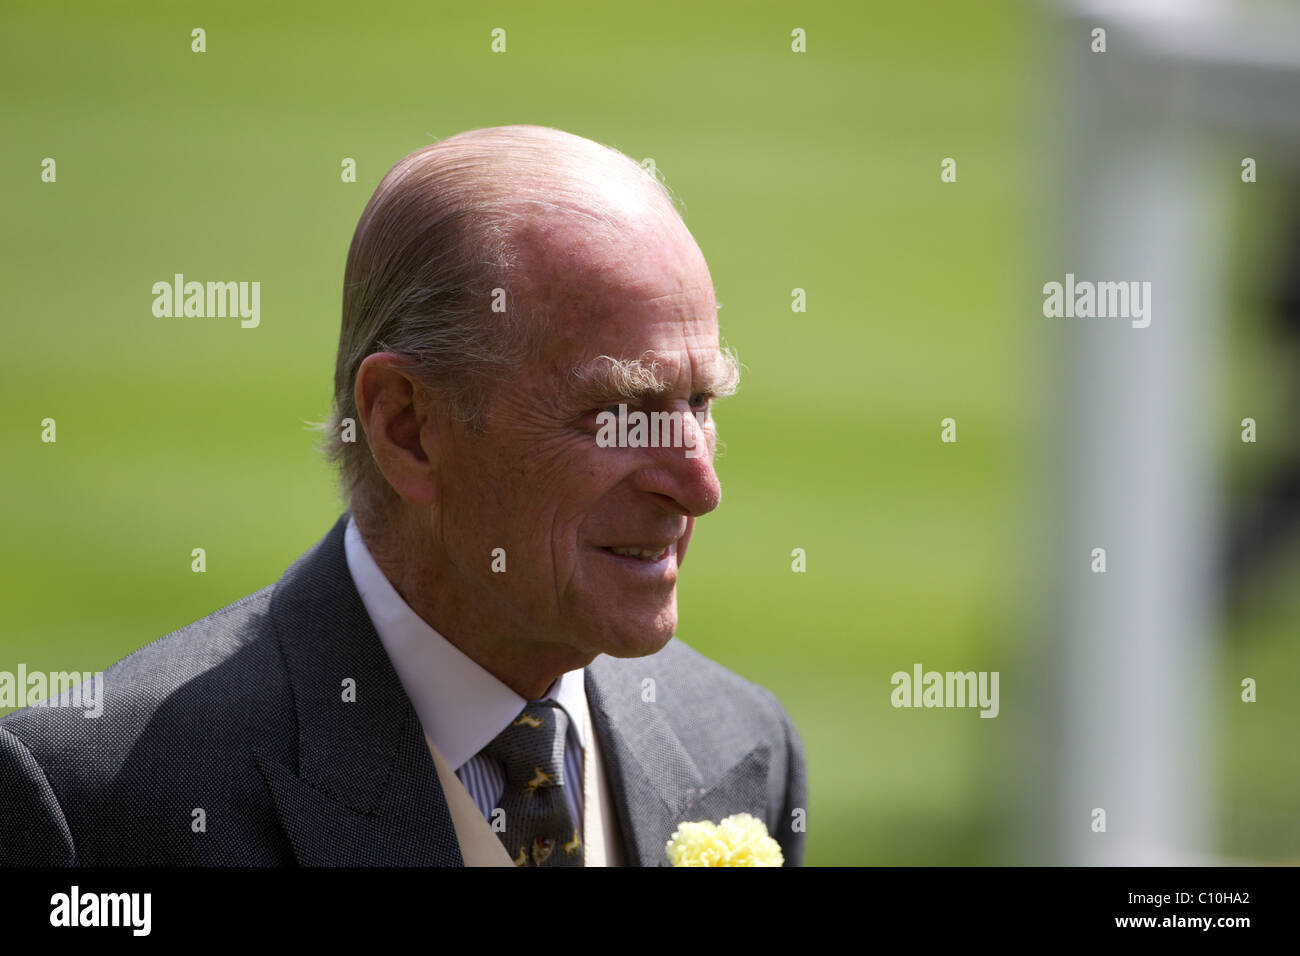 HRH Prince Philip arrives at Royal Ascot Race Course with Queen Elizabeth II, at Ascot, UK, on Friday, June 19, 2009. Stock Photo